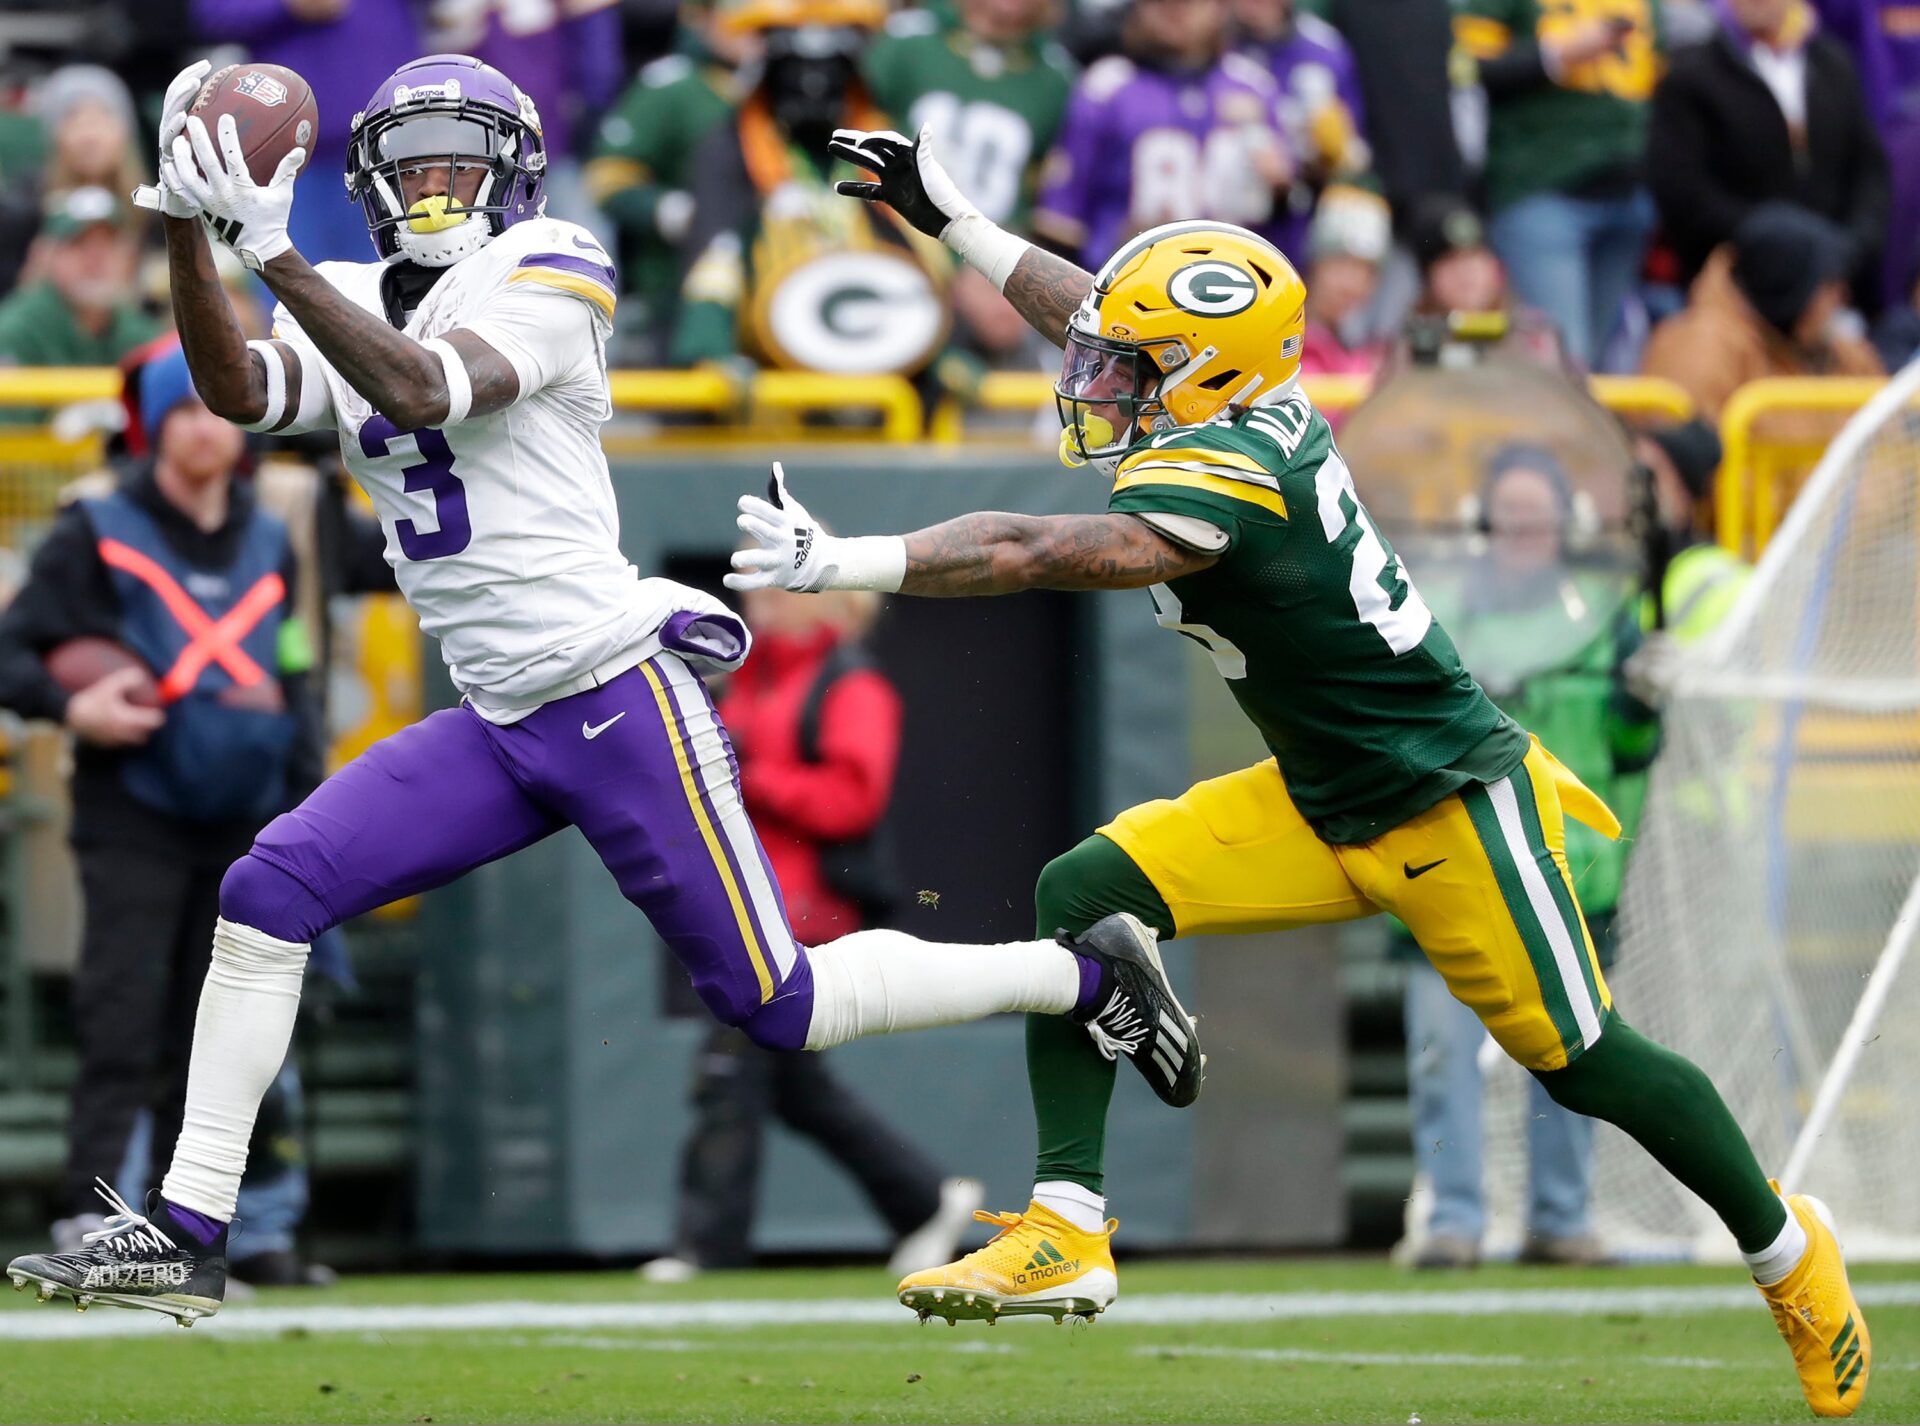 Jordan Addison reaches out to make a catch with a Packers defender trailing